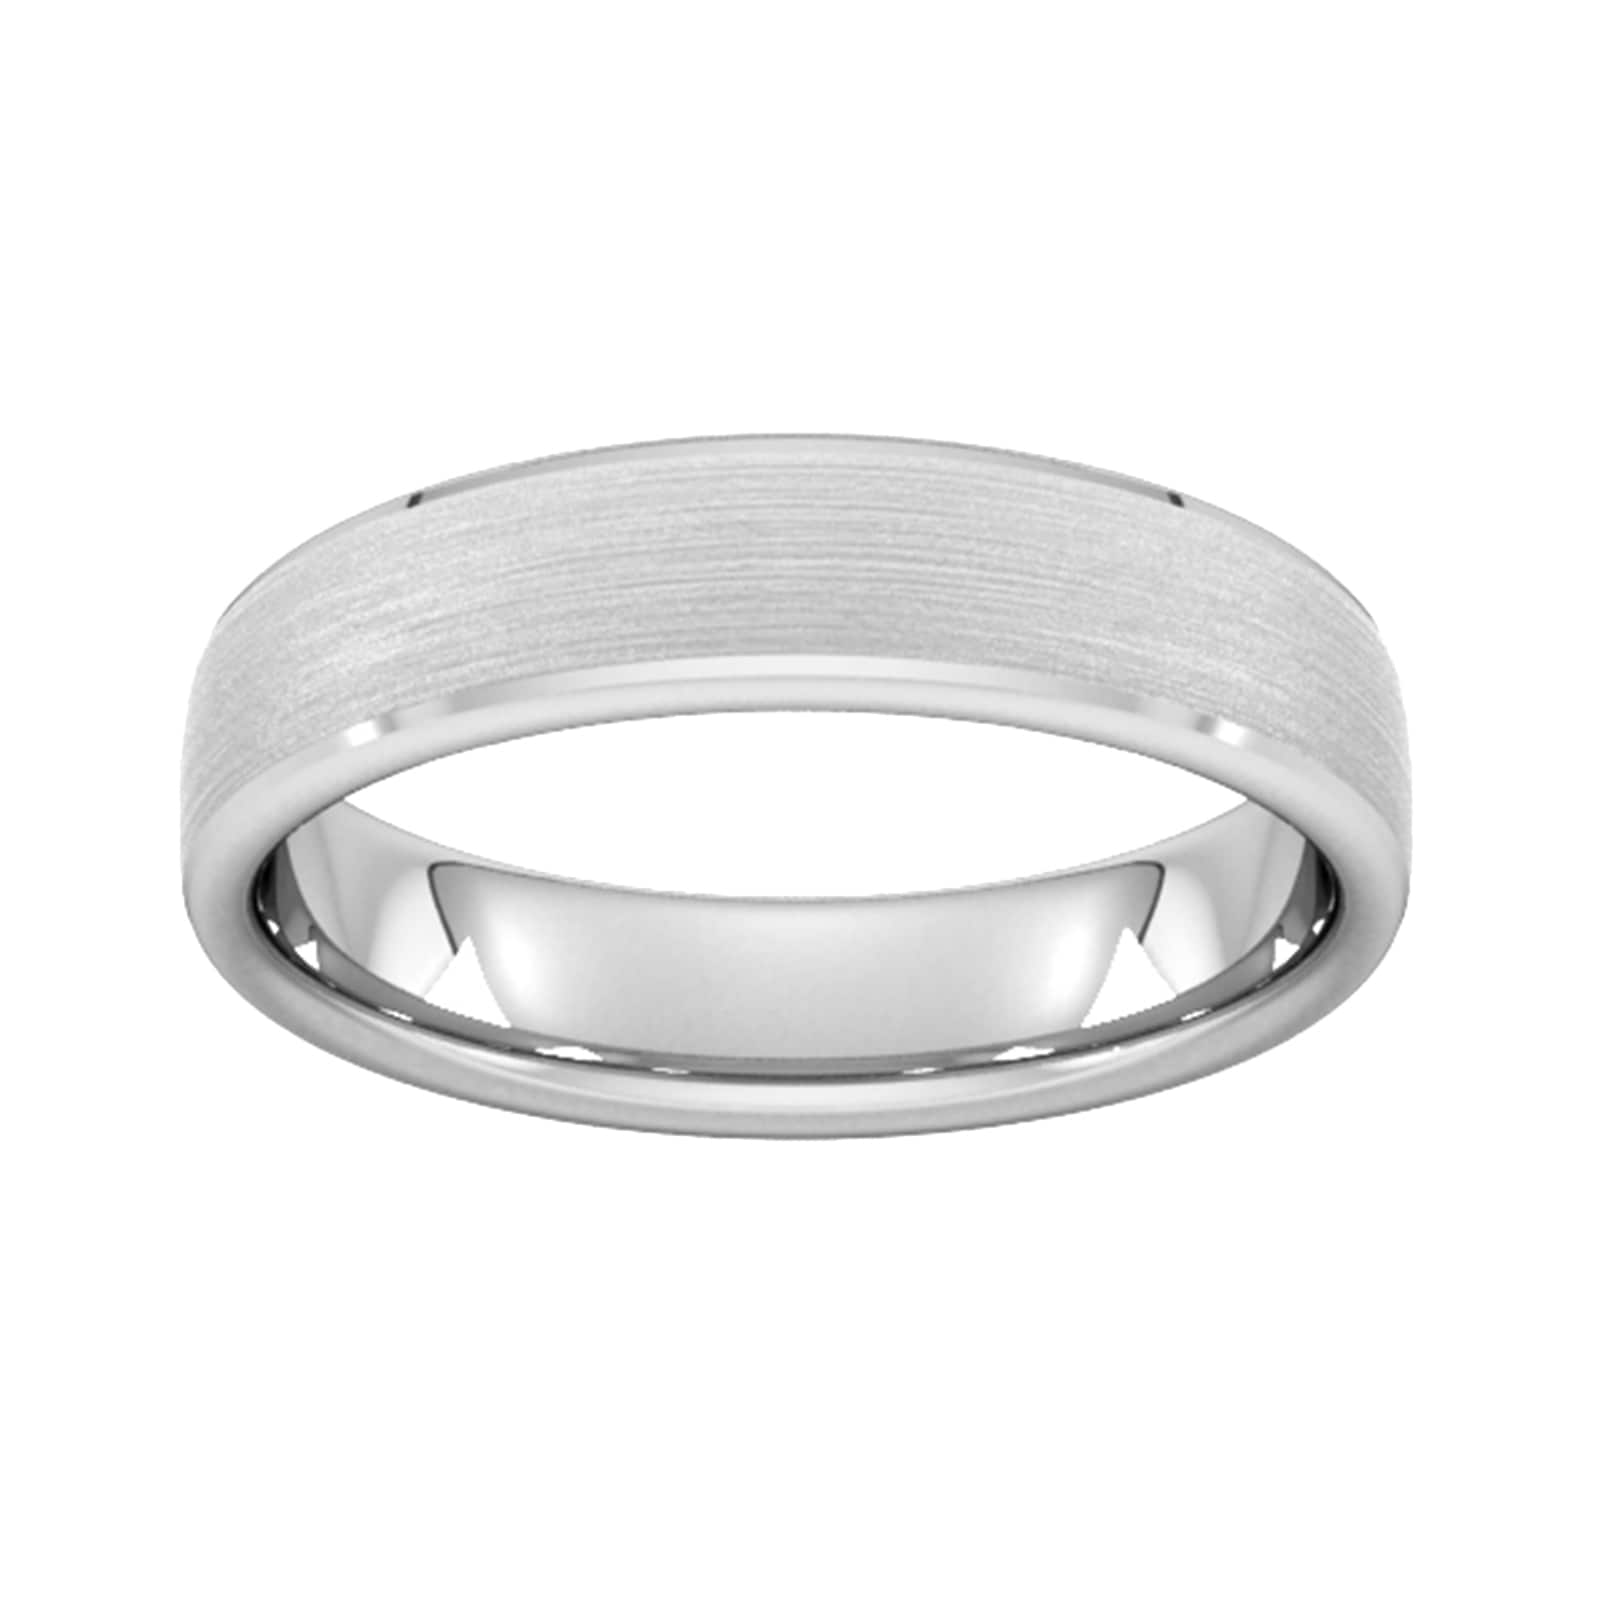 5mm D Shape Standard Polished Chamfered Edges With Matt Centre Wedding Ring In 9 Carat White Gold - Ring Size K